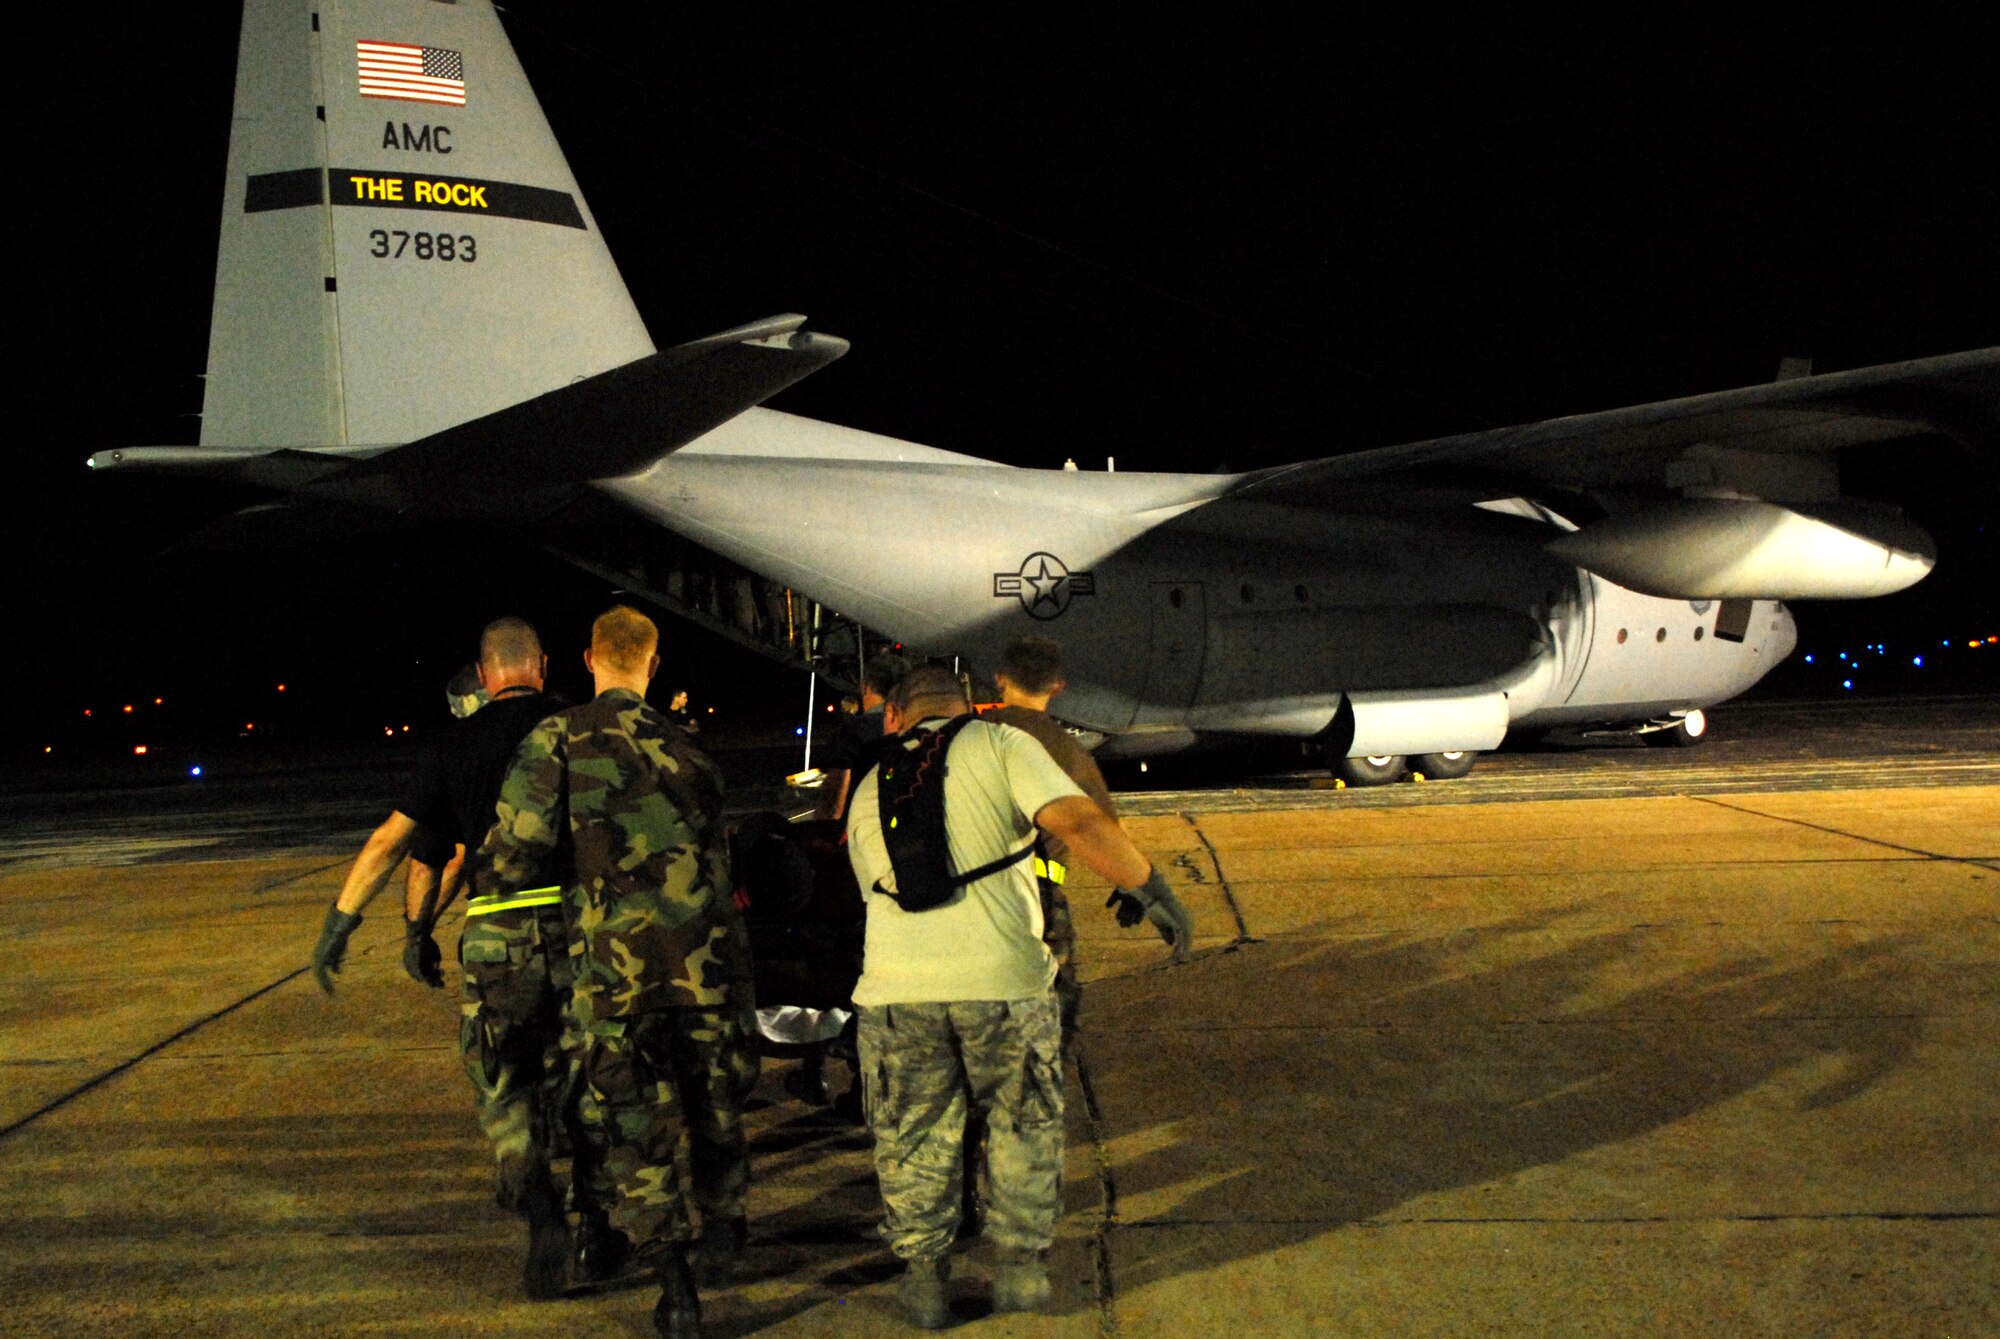 BEAUMONT AIRPORT, Texas -- U.S. Air Force Airmen made up of active duty, Guard, and Reserve from multiple Air Force Bases load hospital patients onto a C-130 aircraft, September 12, 2008. Little Rock Air Force Base C-130s were deployed to perform aero medical and transportation missions in preparation for Hurricane Ike's landfall in southern Texas.  (U.S. Air Force photo by Staff Sgt. Chris Willis) (RELEASED)